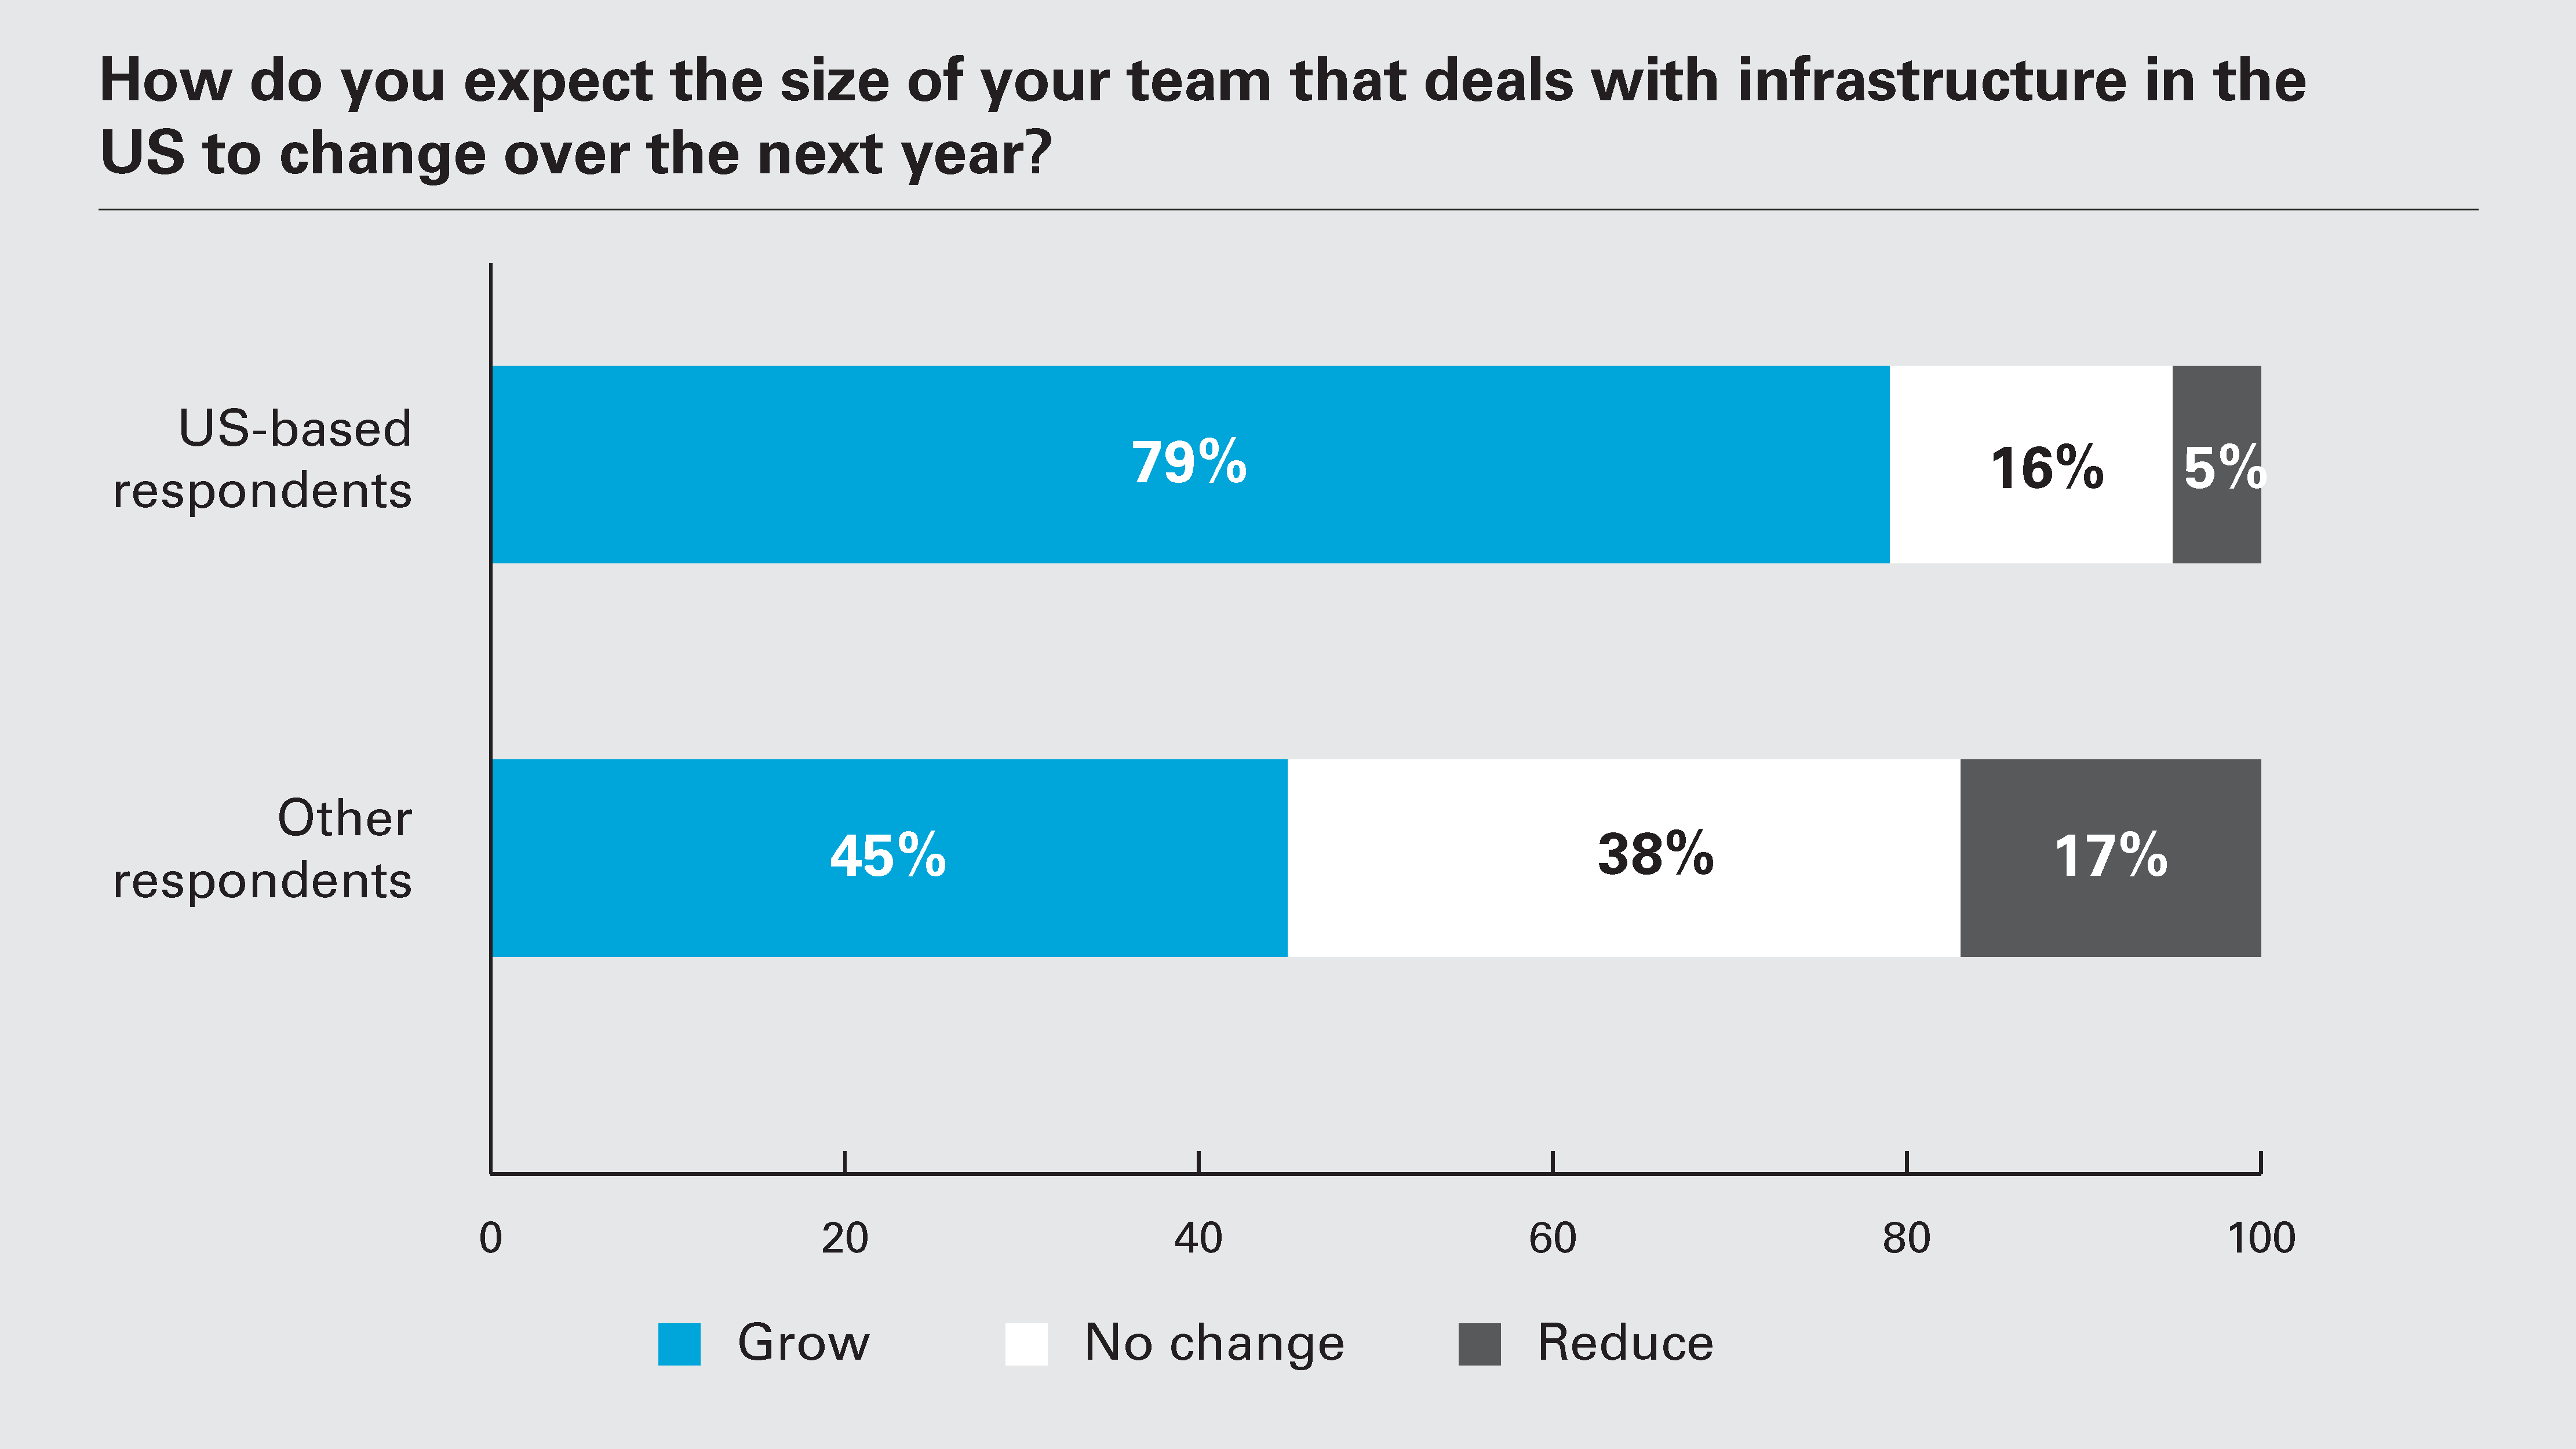 How do you expect the size of your team that deals with infrastructure in the US to change over the next year?